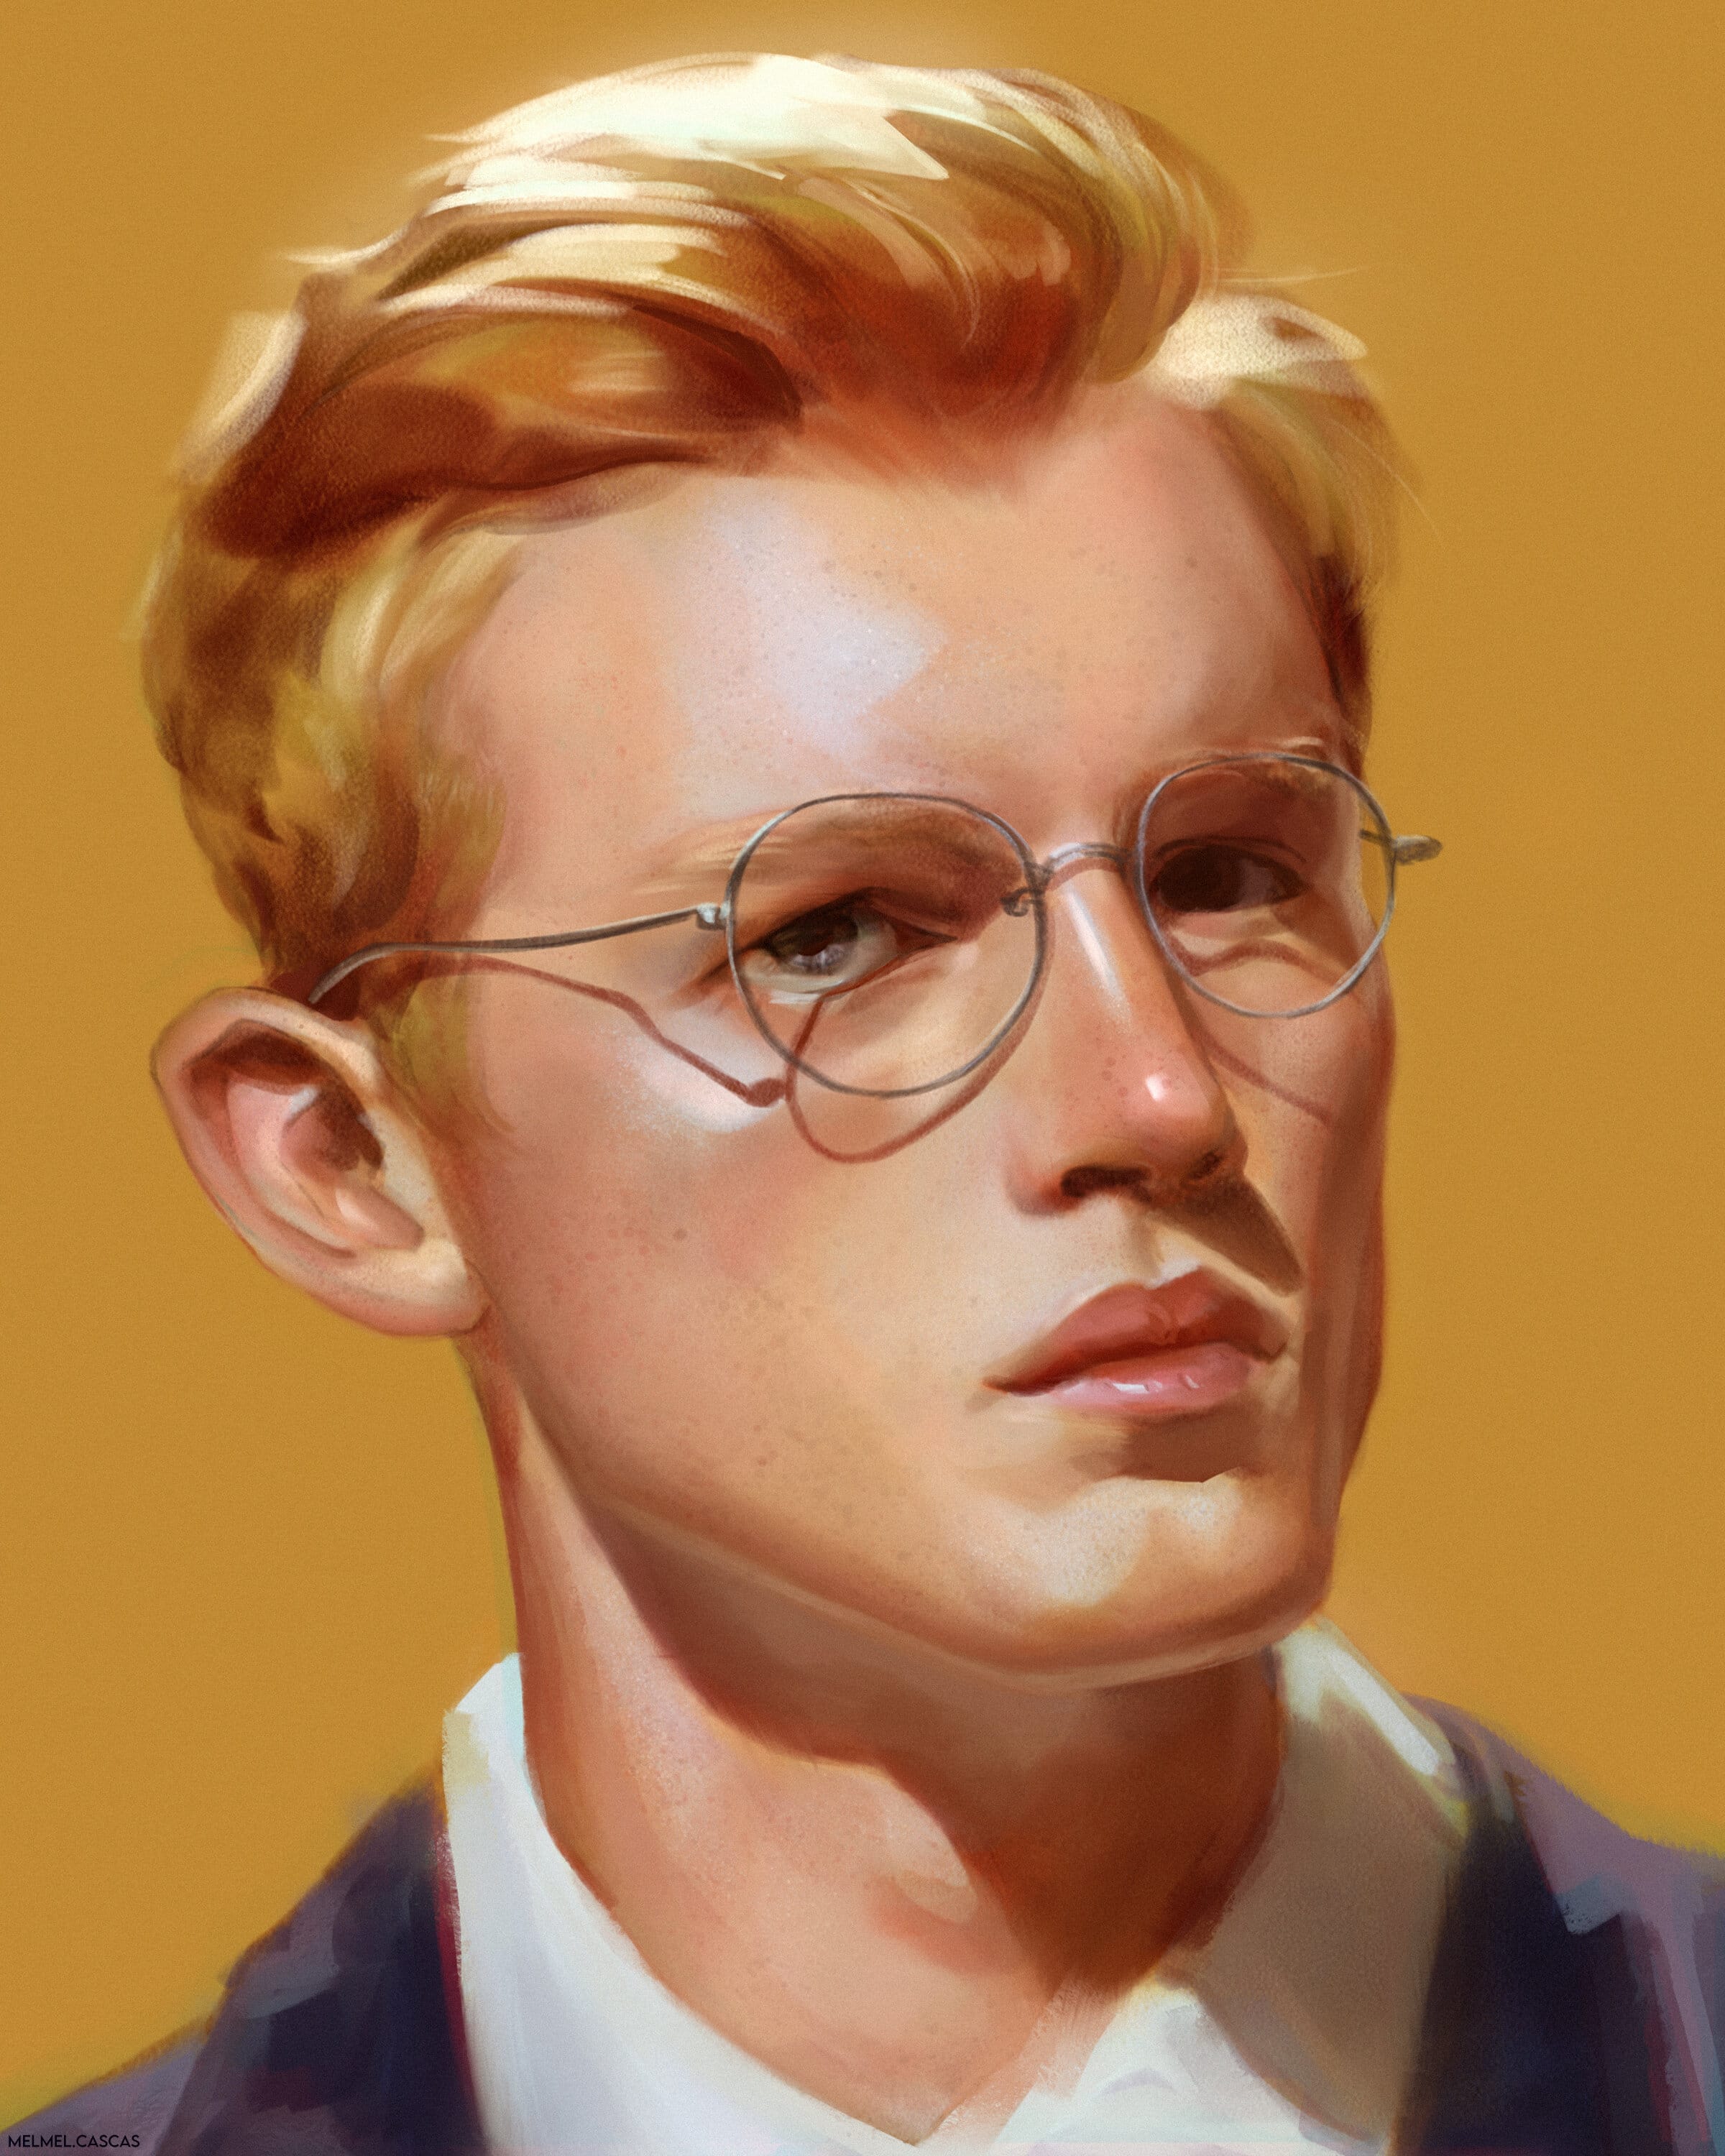 illustration of a blonde man with glasses